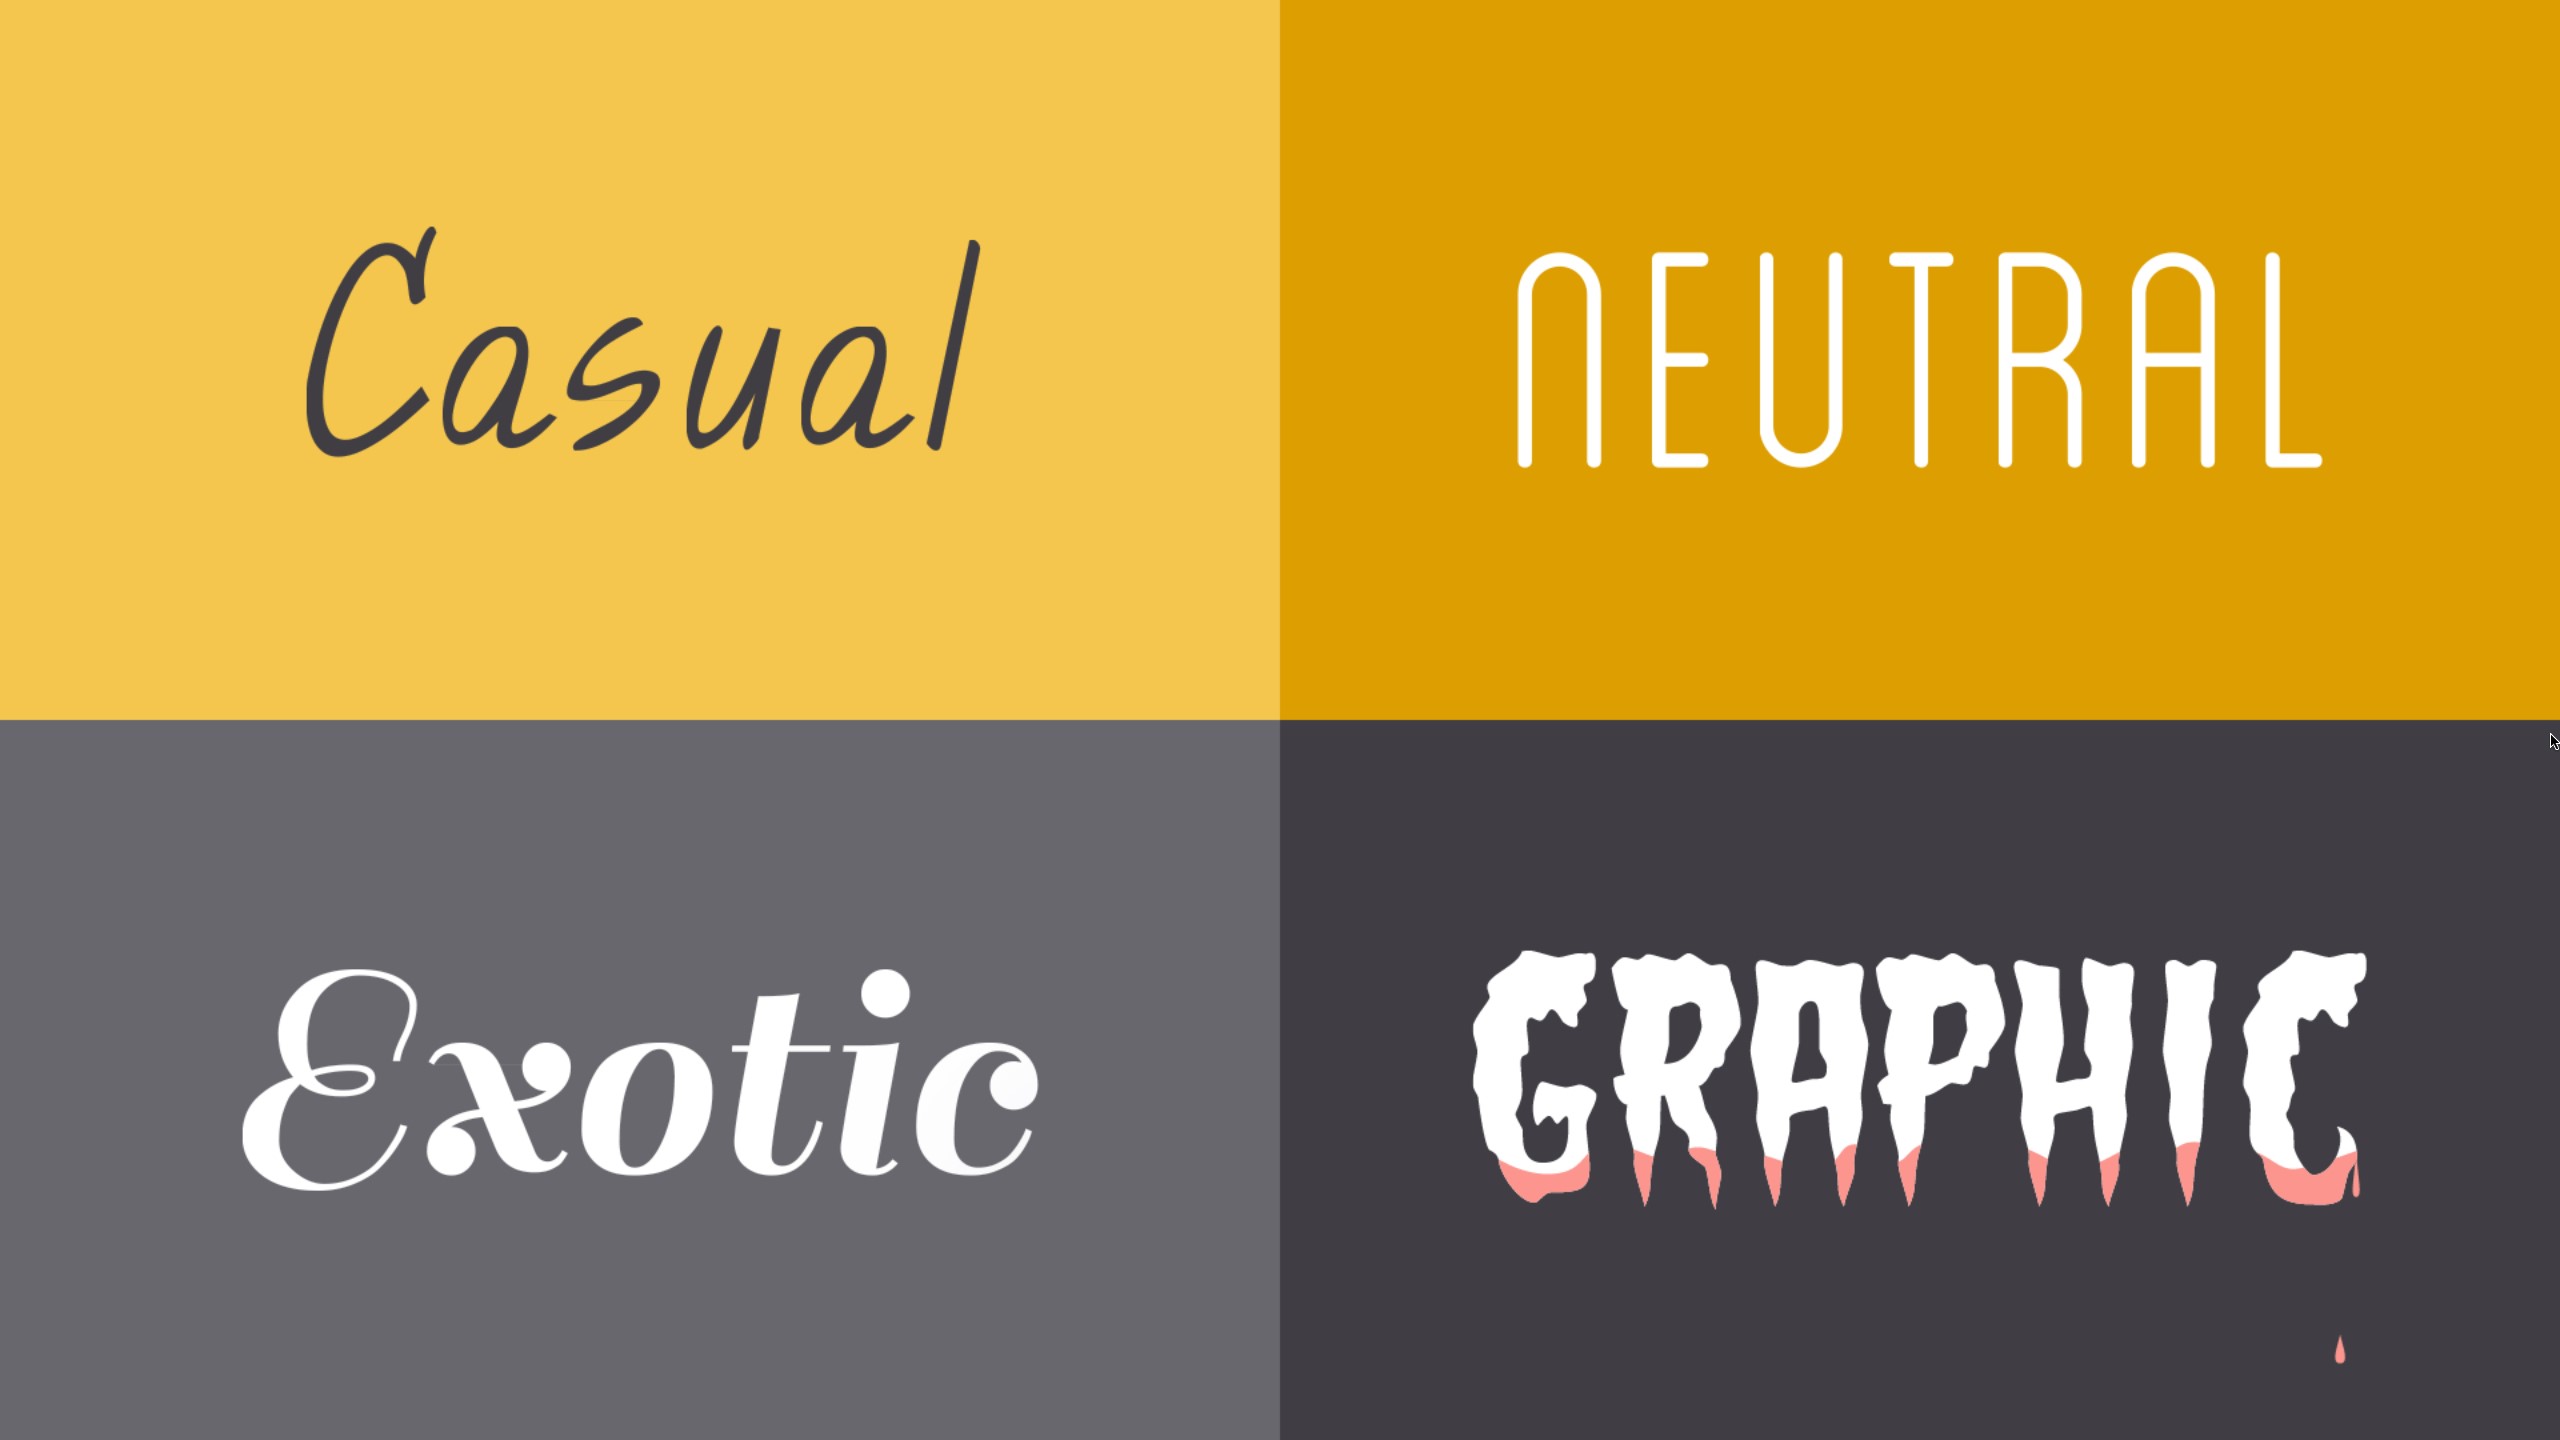 Use Fewer Fonts In Your Graphic Designs